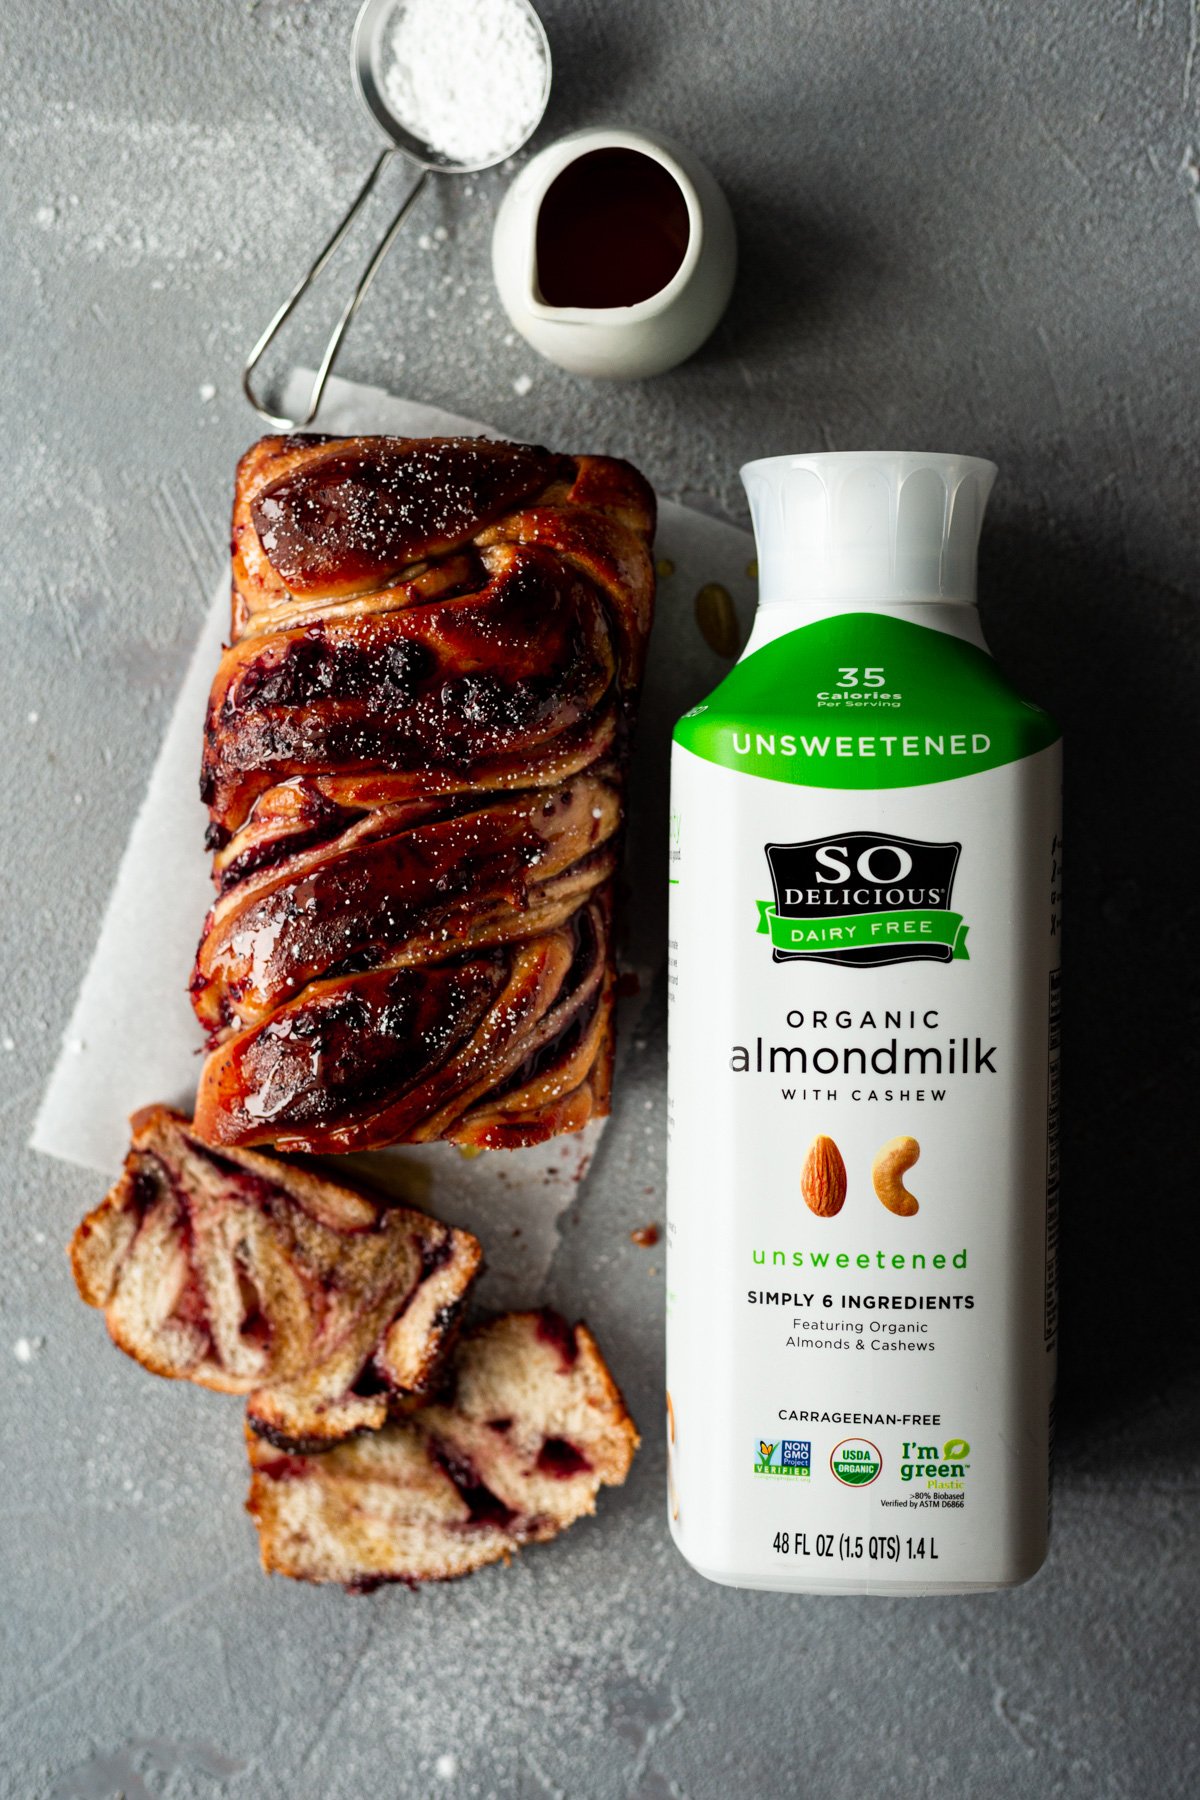 vegan lingonberry babka loaf and bottle of So Delicious Dairy Free Almondmilk with Cashew